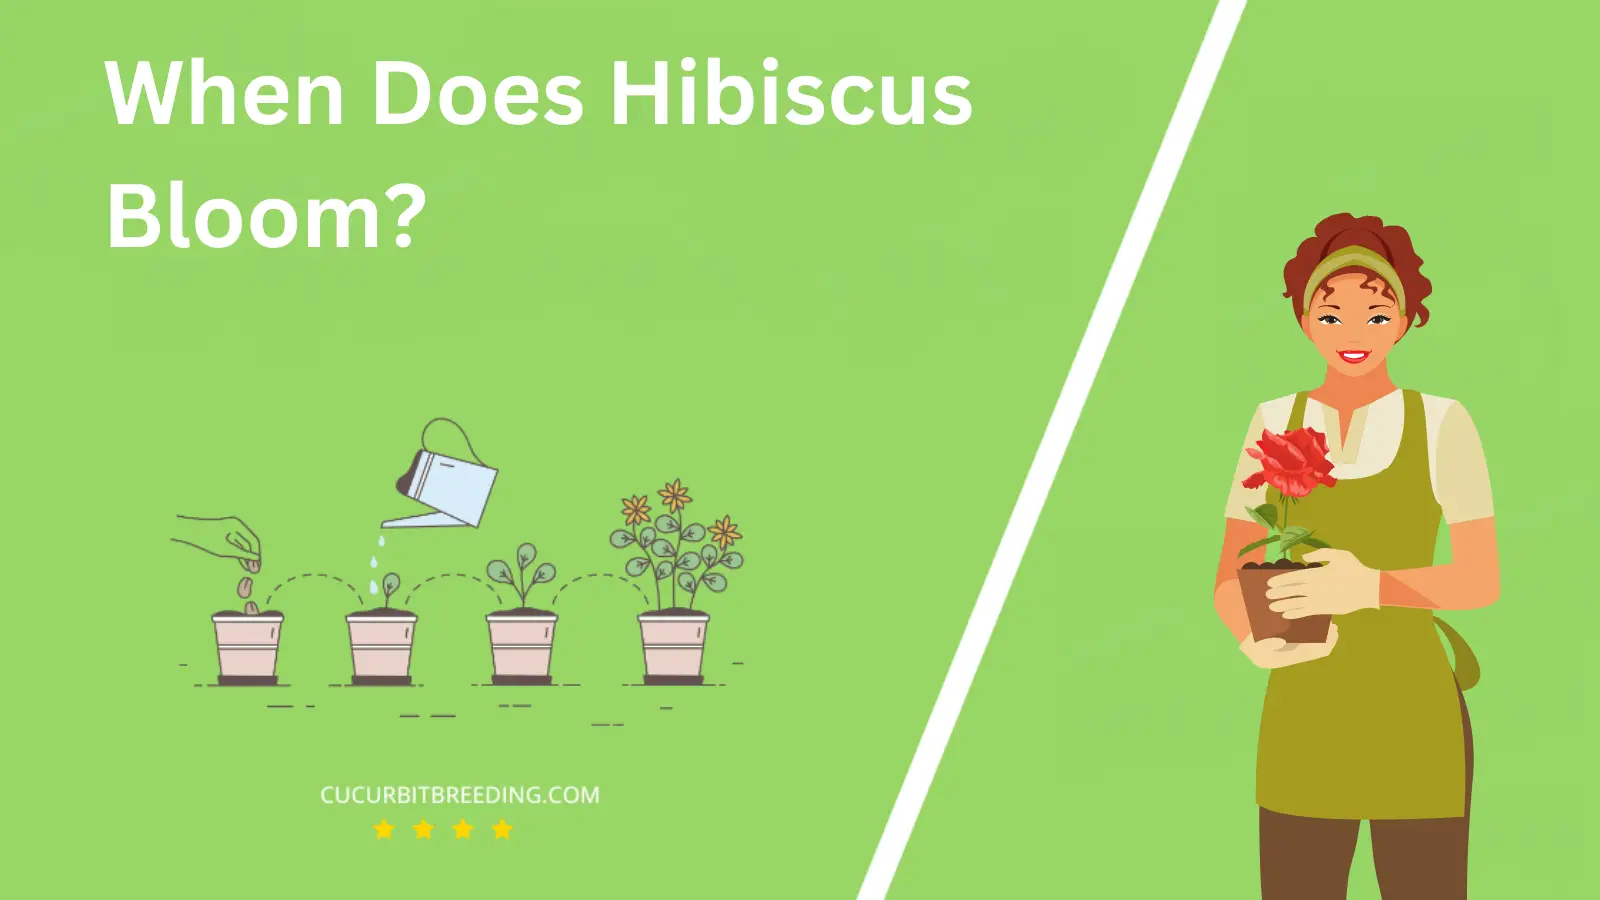 When Does Hibiscus Bloom?